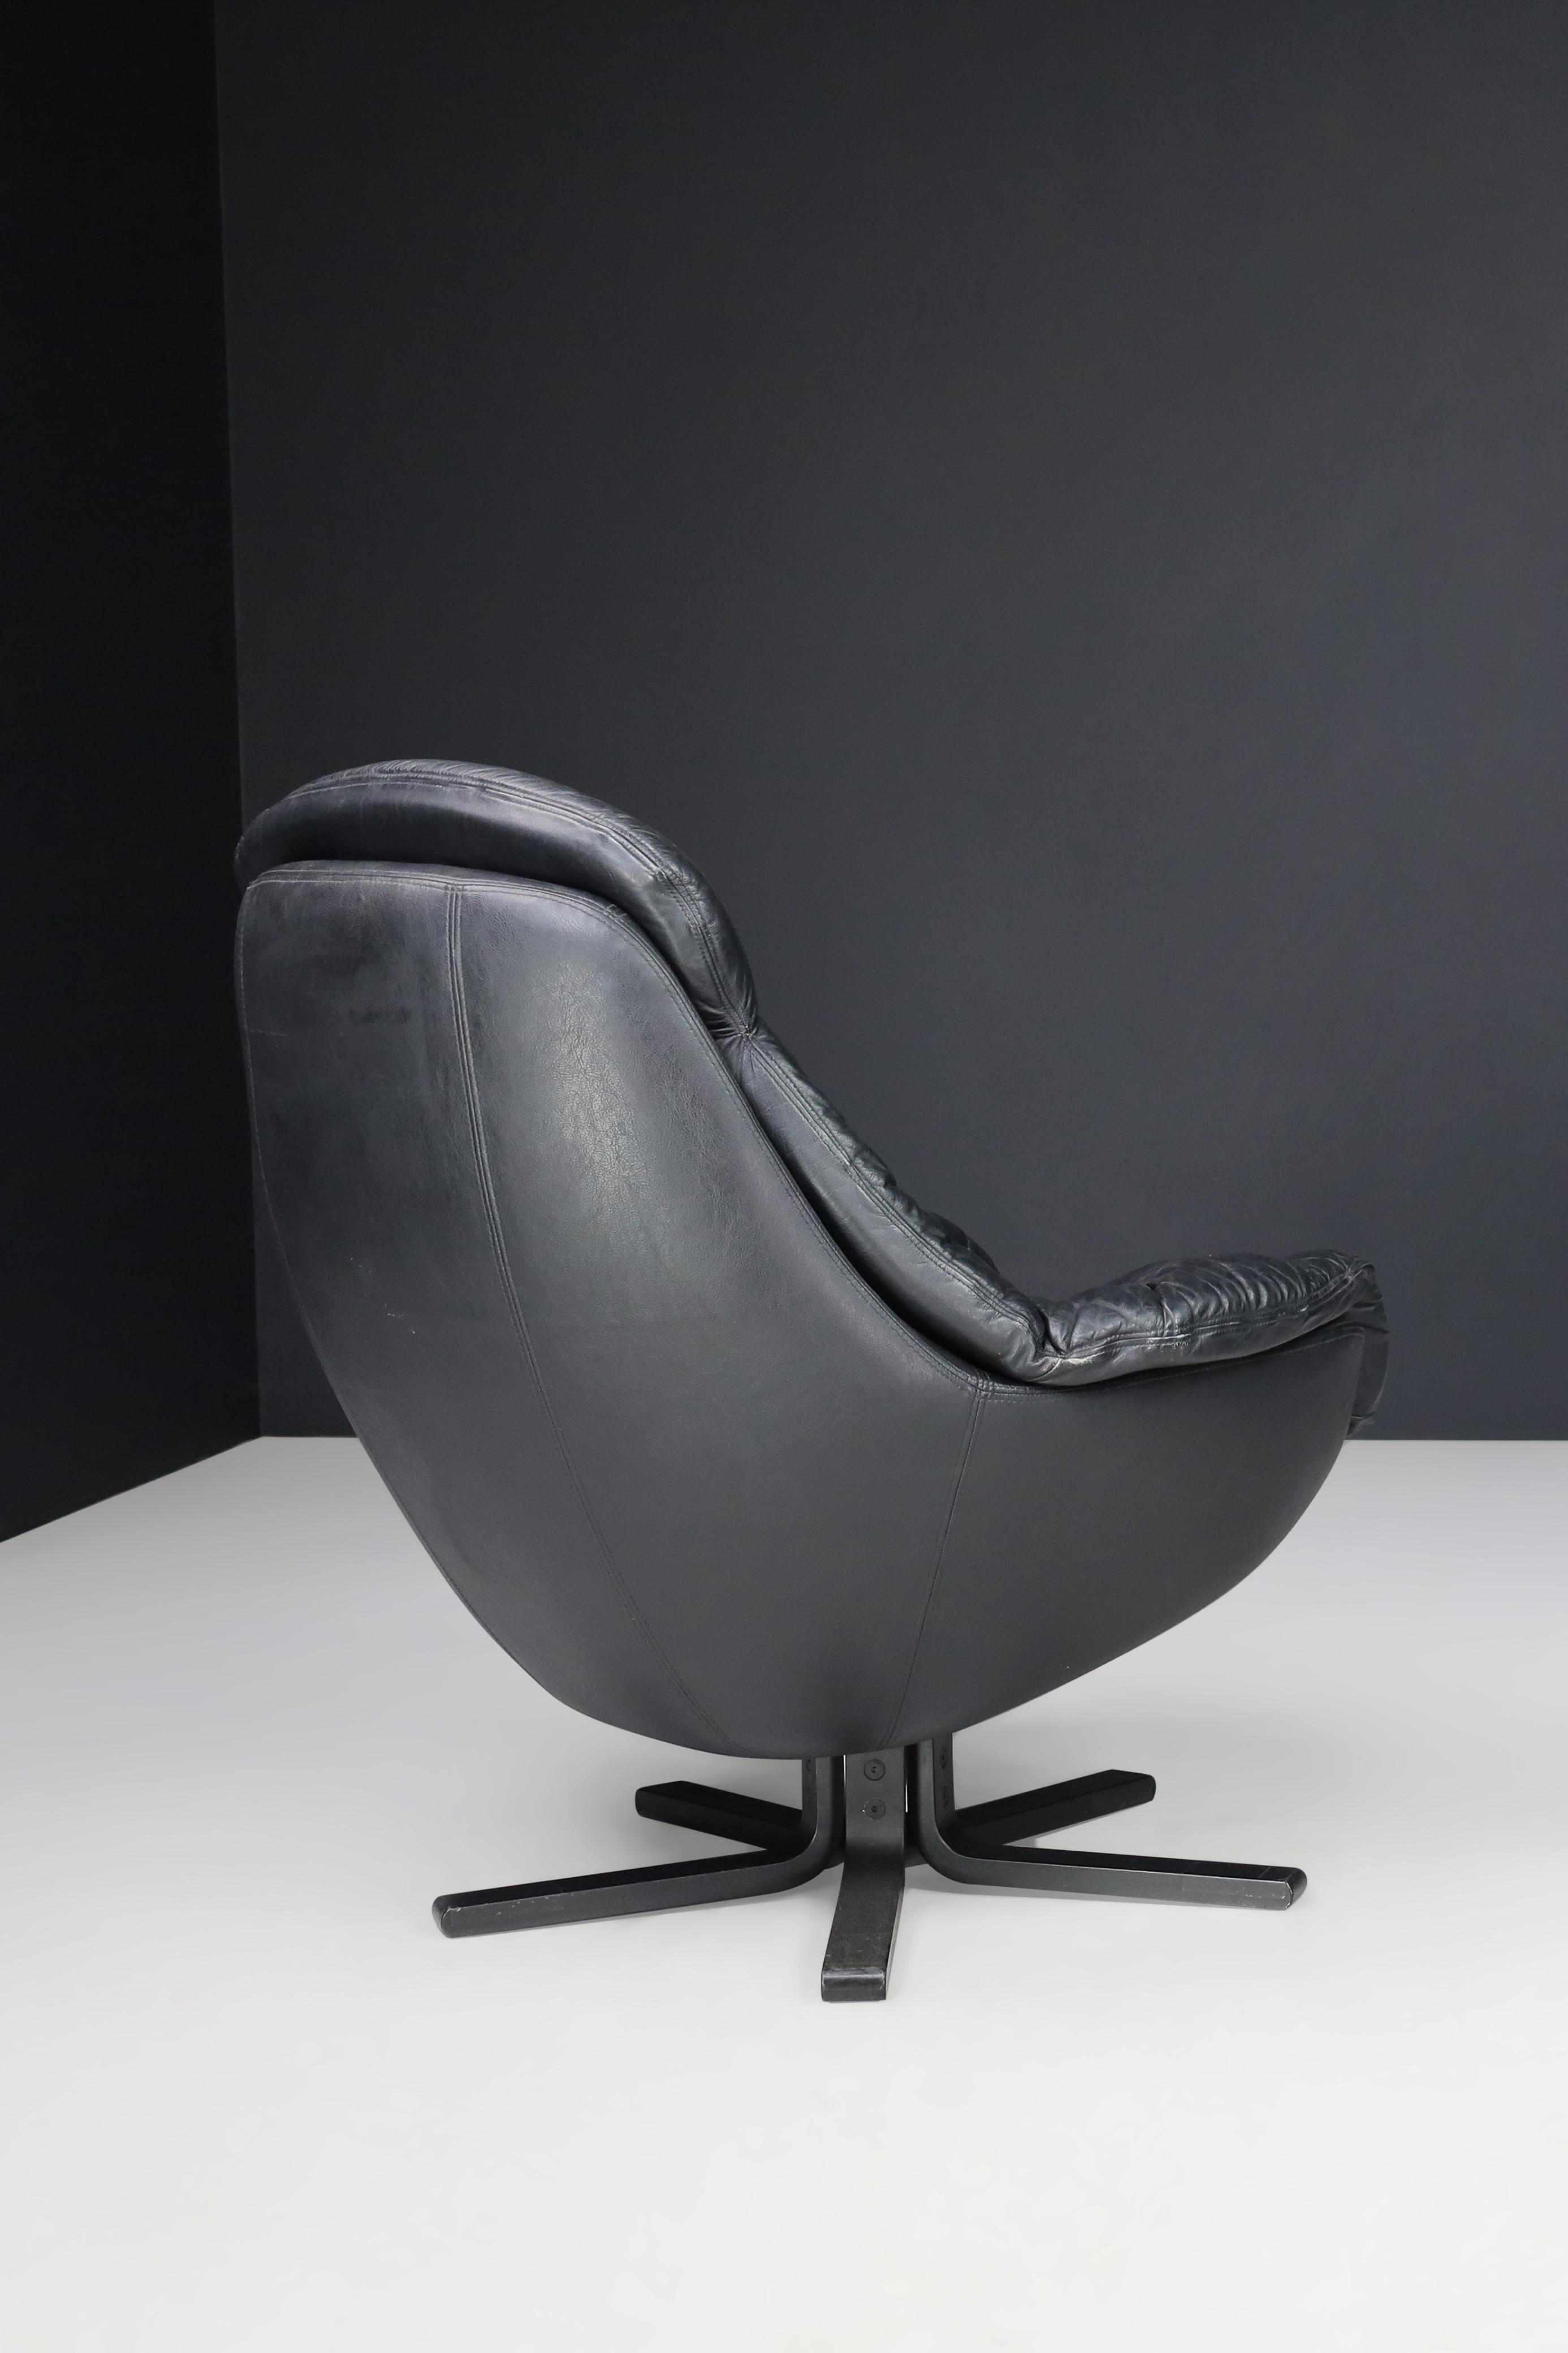 20th Century H.W. Klein for Bramin Leather Swivel Lounge Chairs, Denmark 1970s For Sale